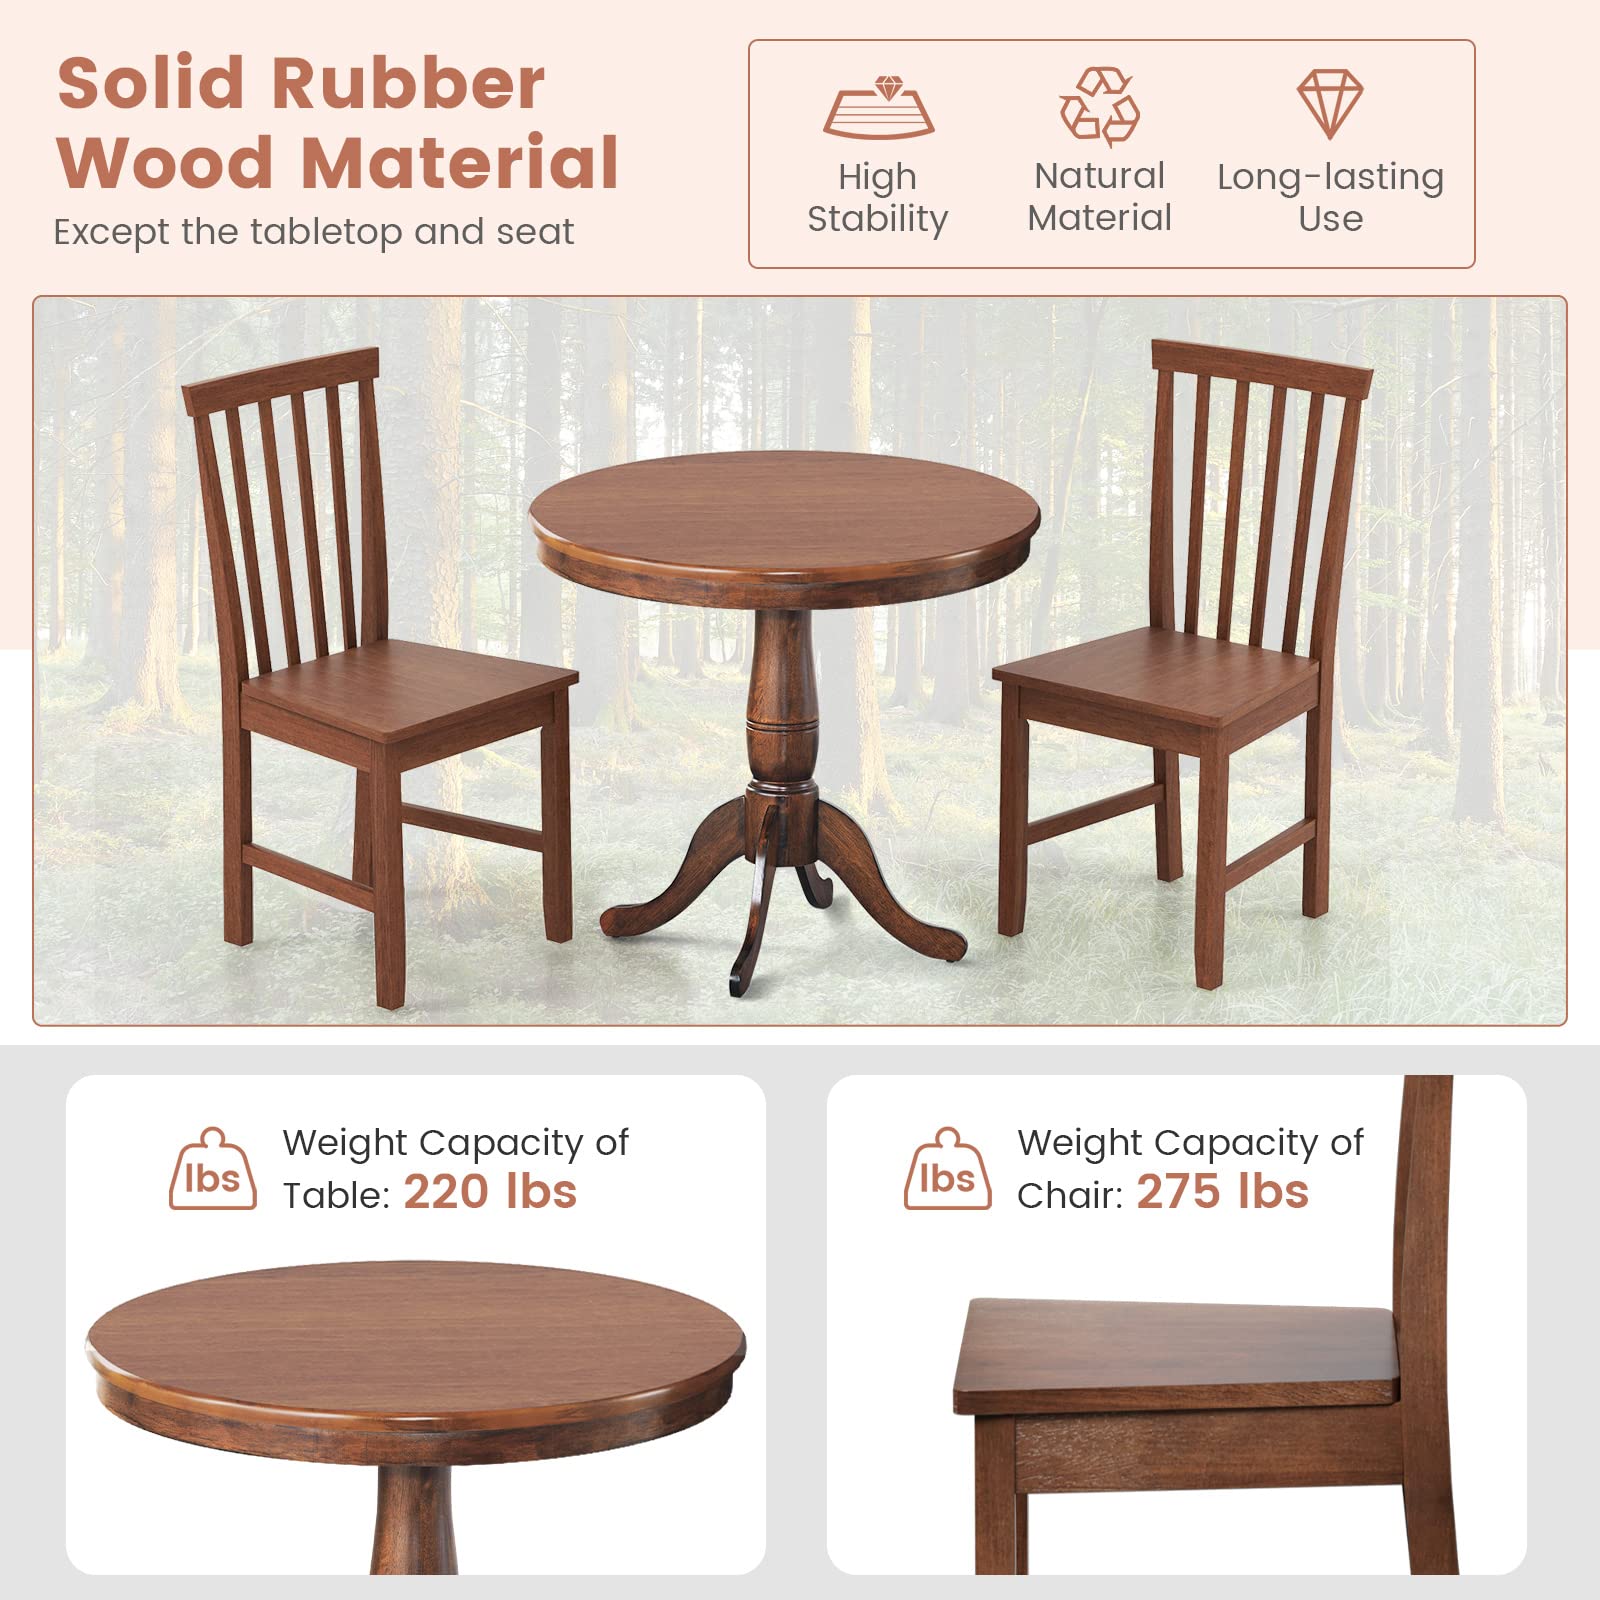 3-Piece Kitchen Table Set, Mid-Century Round Dining Table & Chairs Set for 2, Walnut